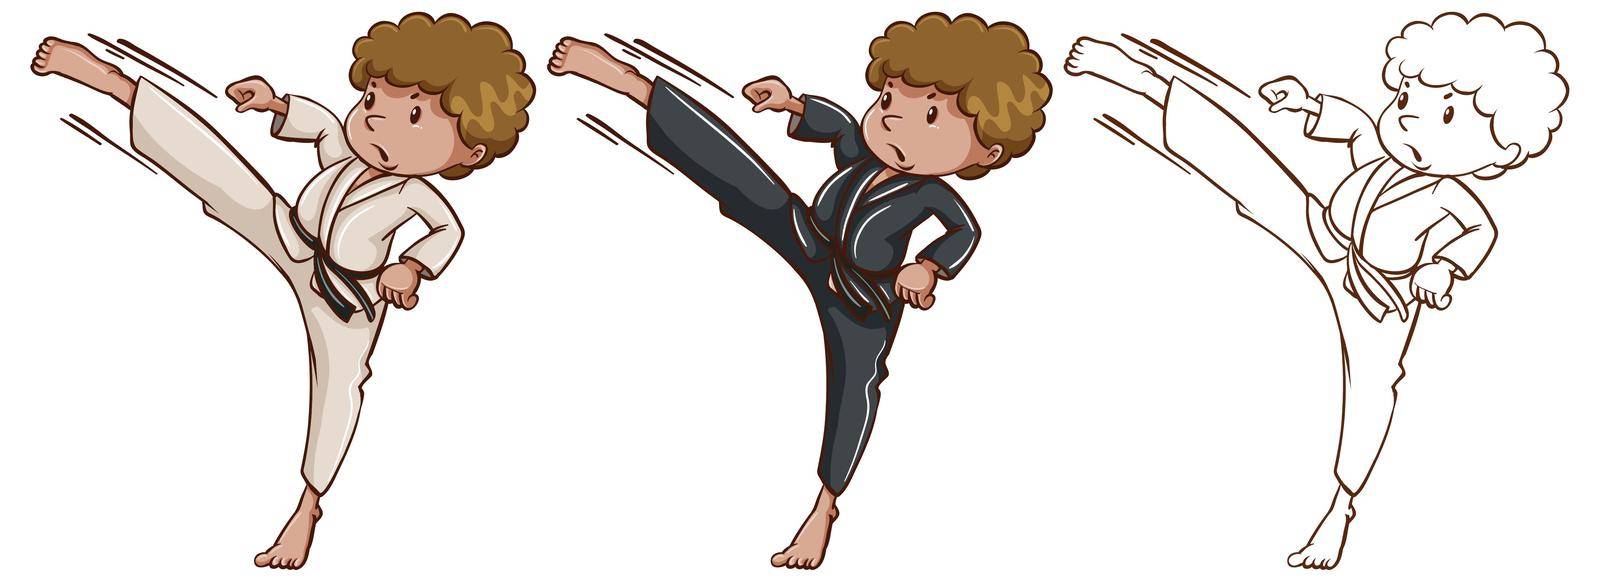 Doodle character for martial arts by iimages